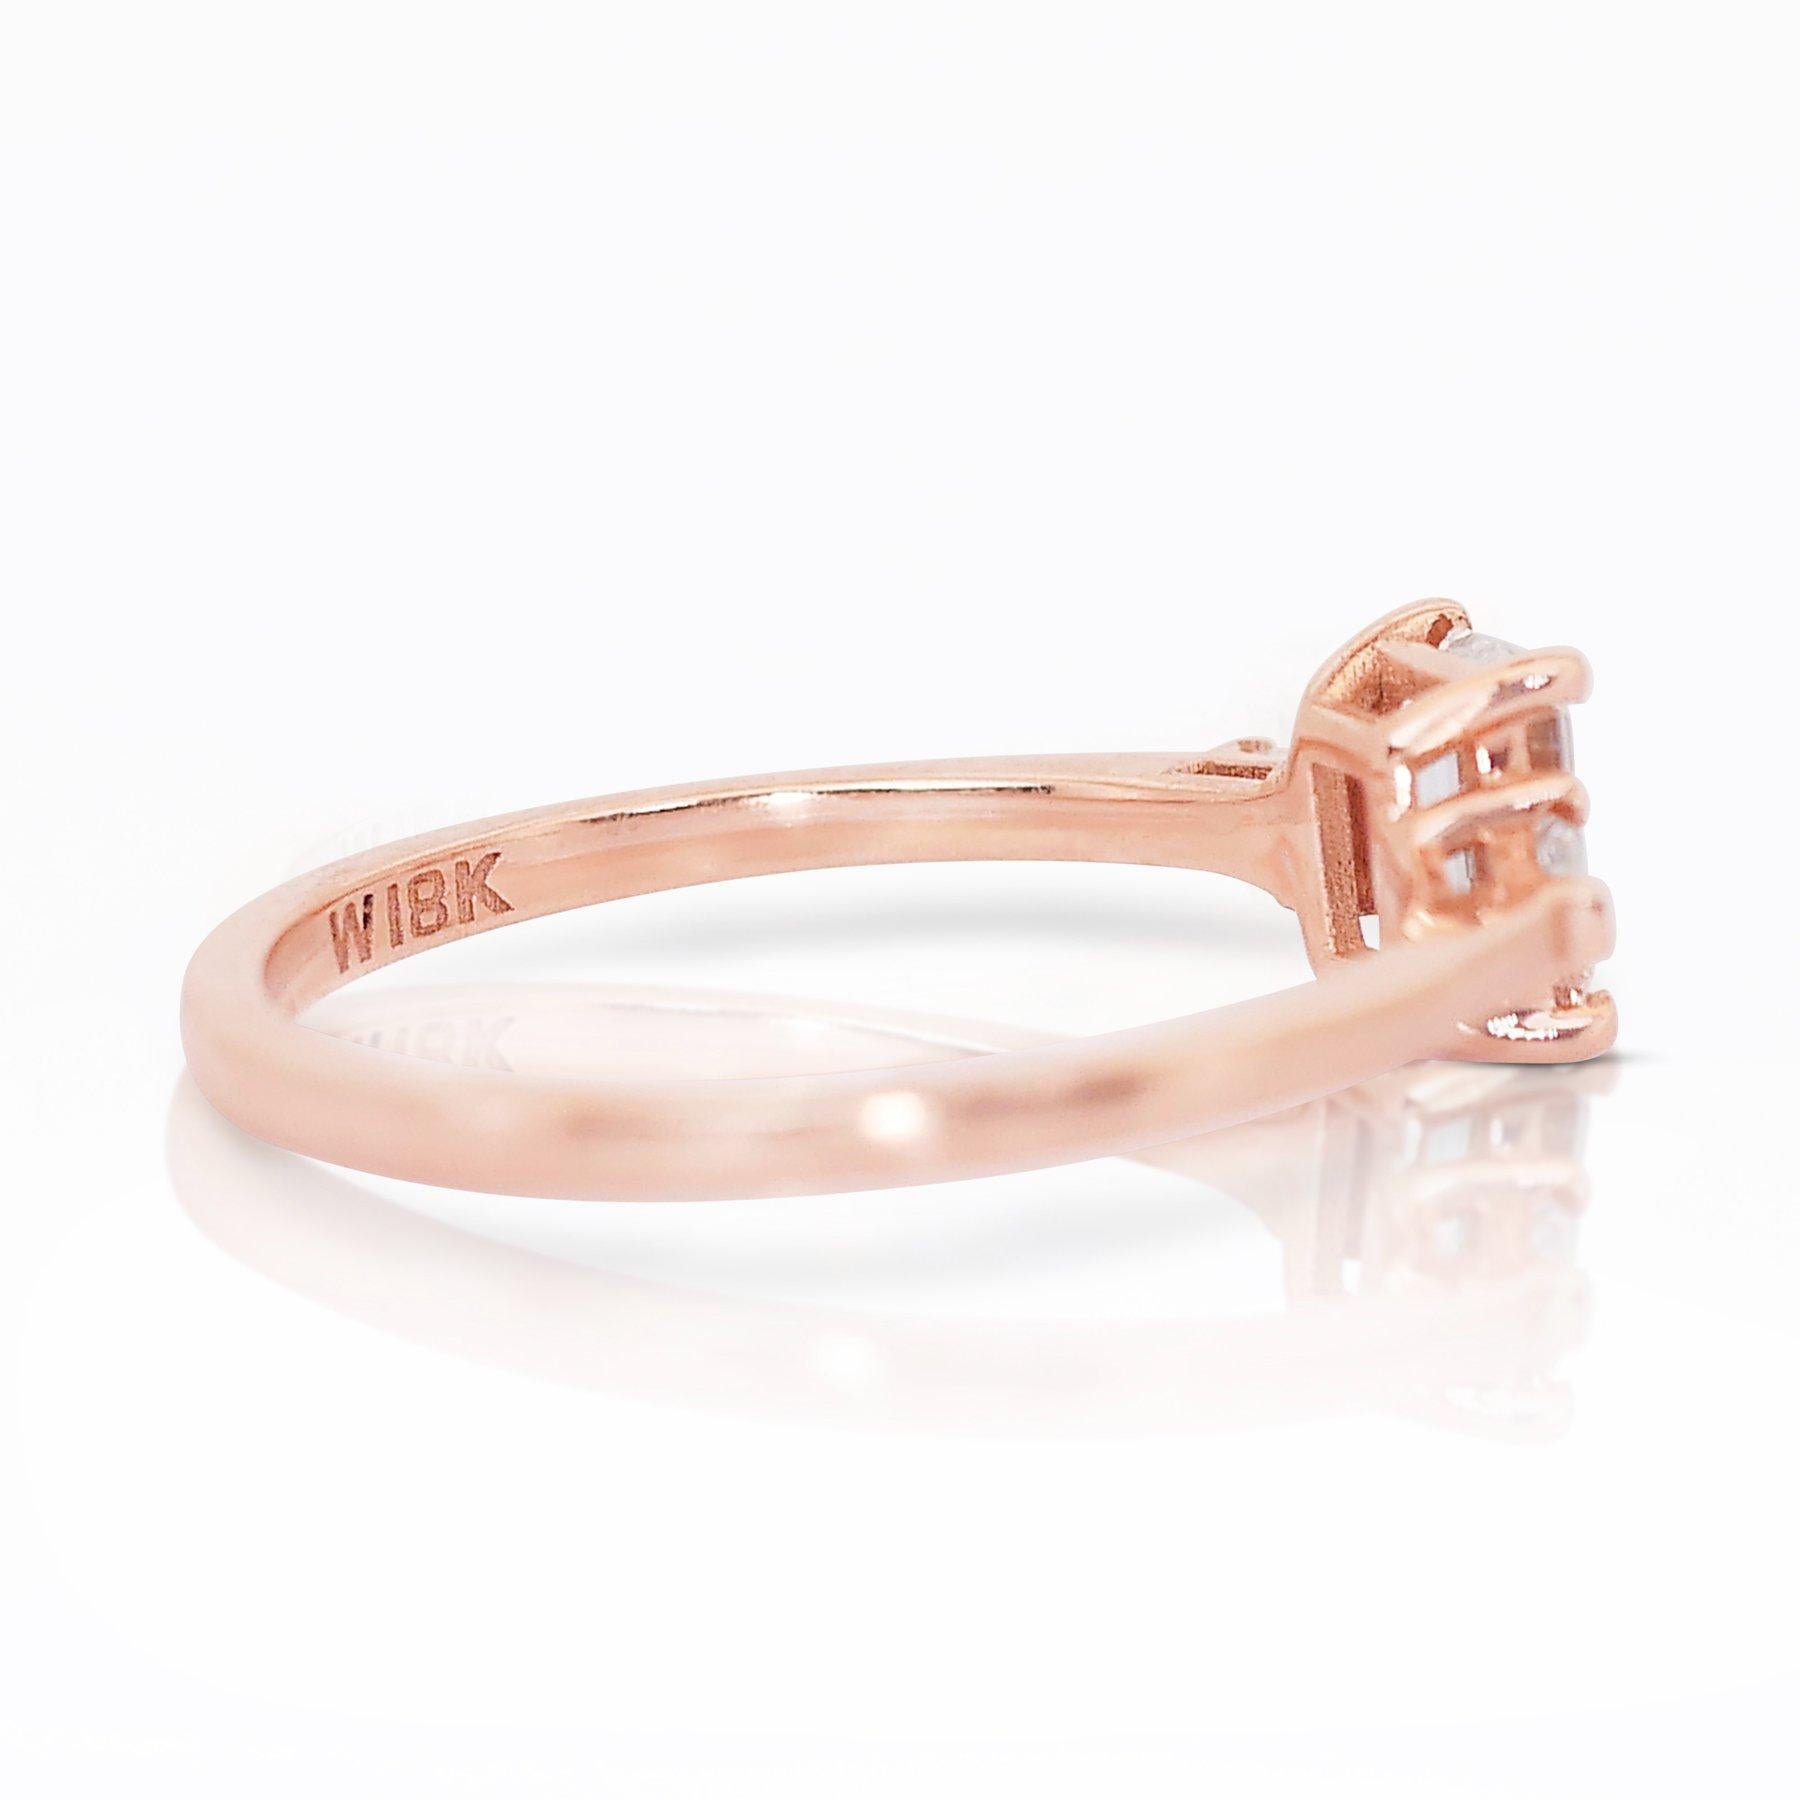 Elegant 0.90ct Emerald-Cut Diamond 3-Stone Ring in 18k Rose Gold - GIA Certified For Sale 1